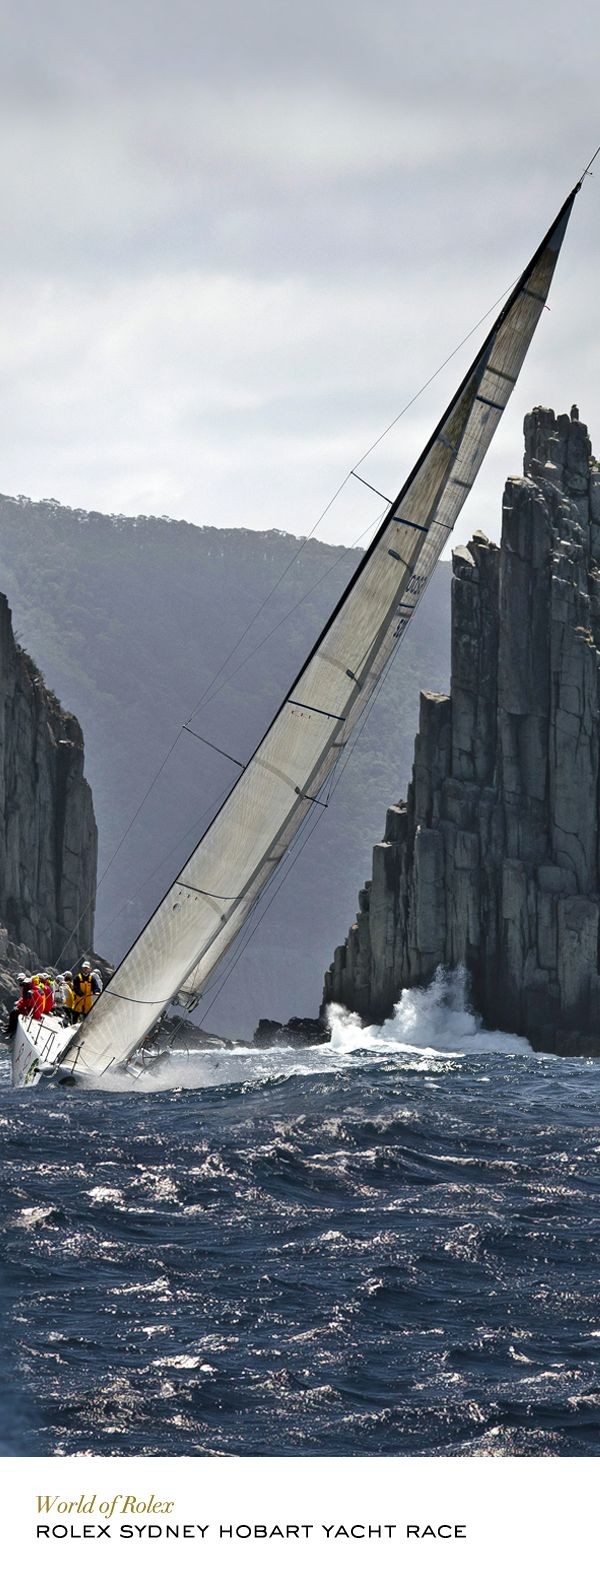 As one of the world's toughest offshore yacht race...